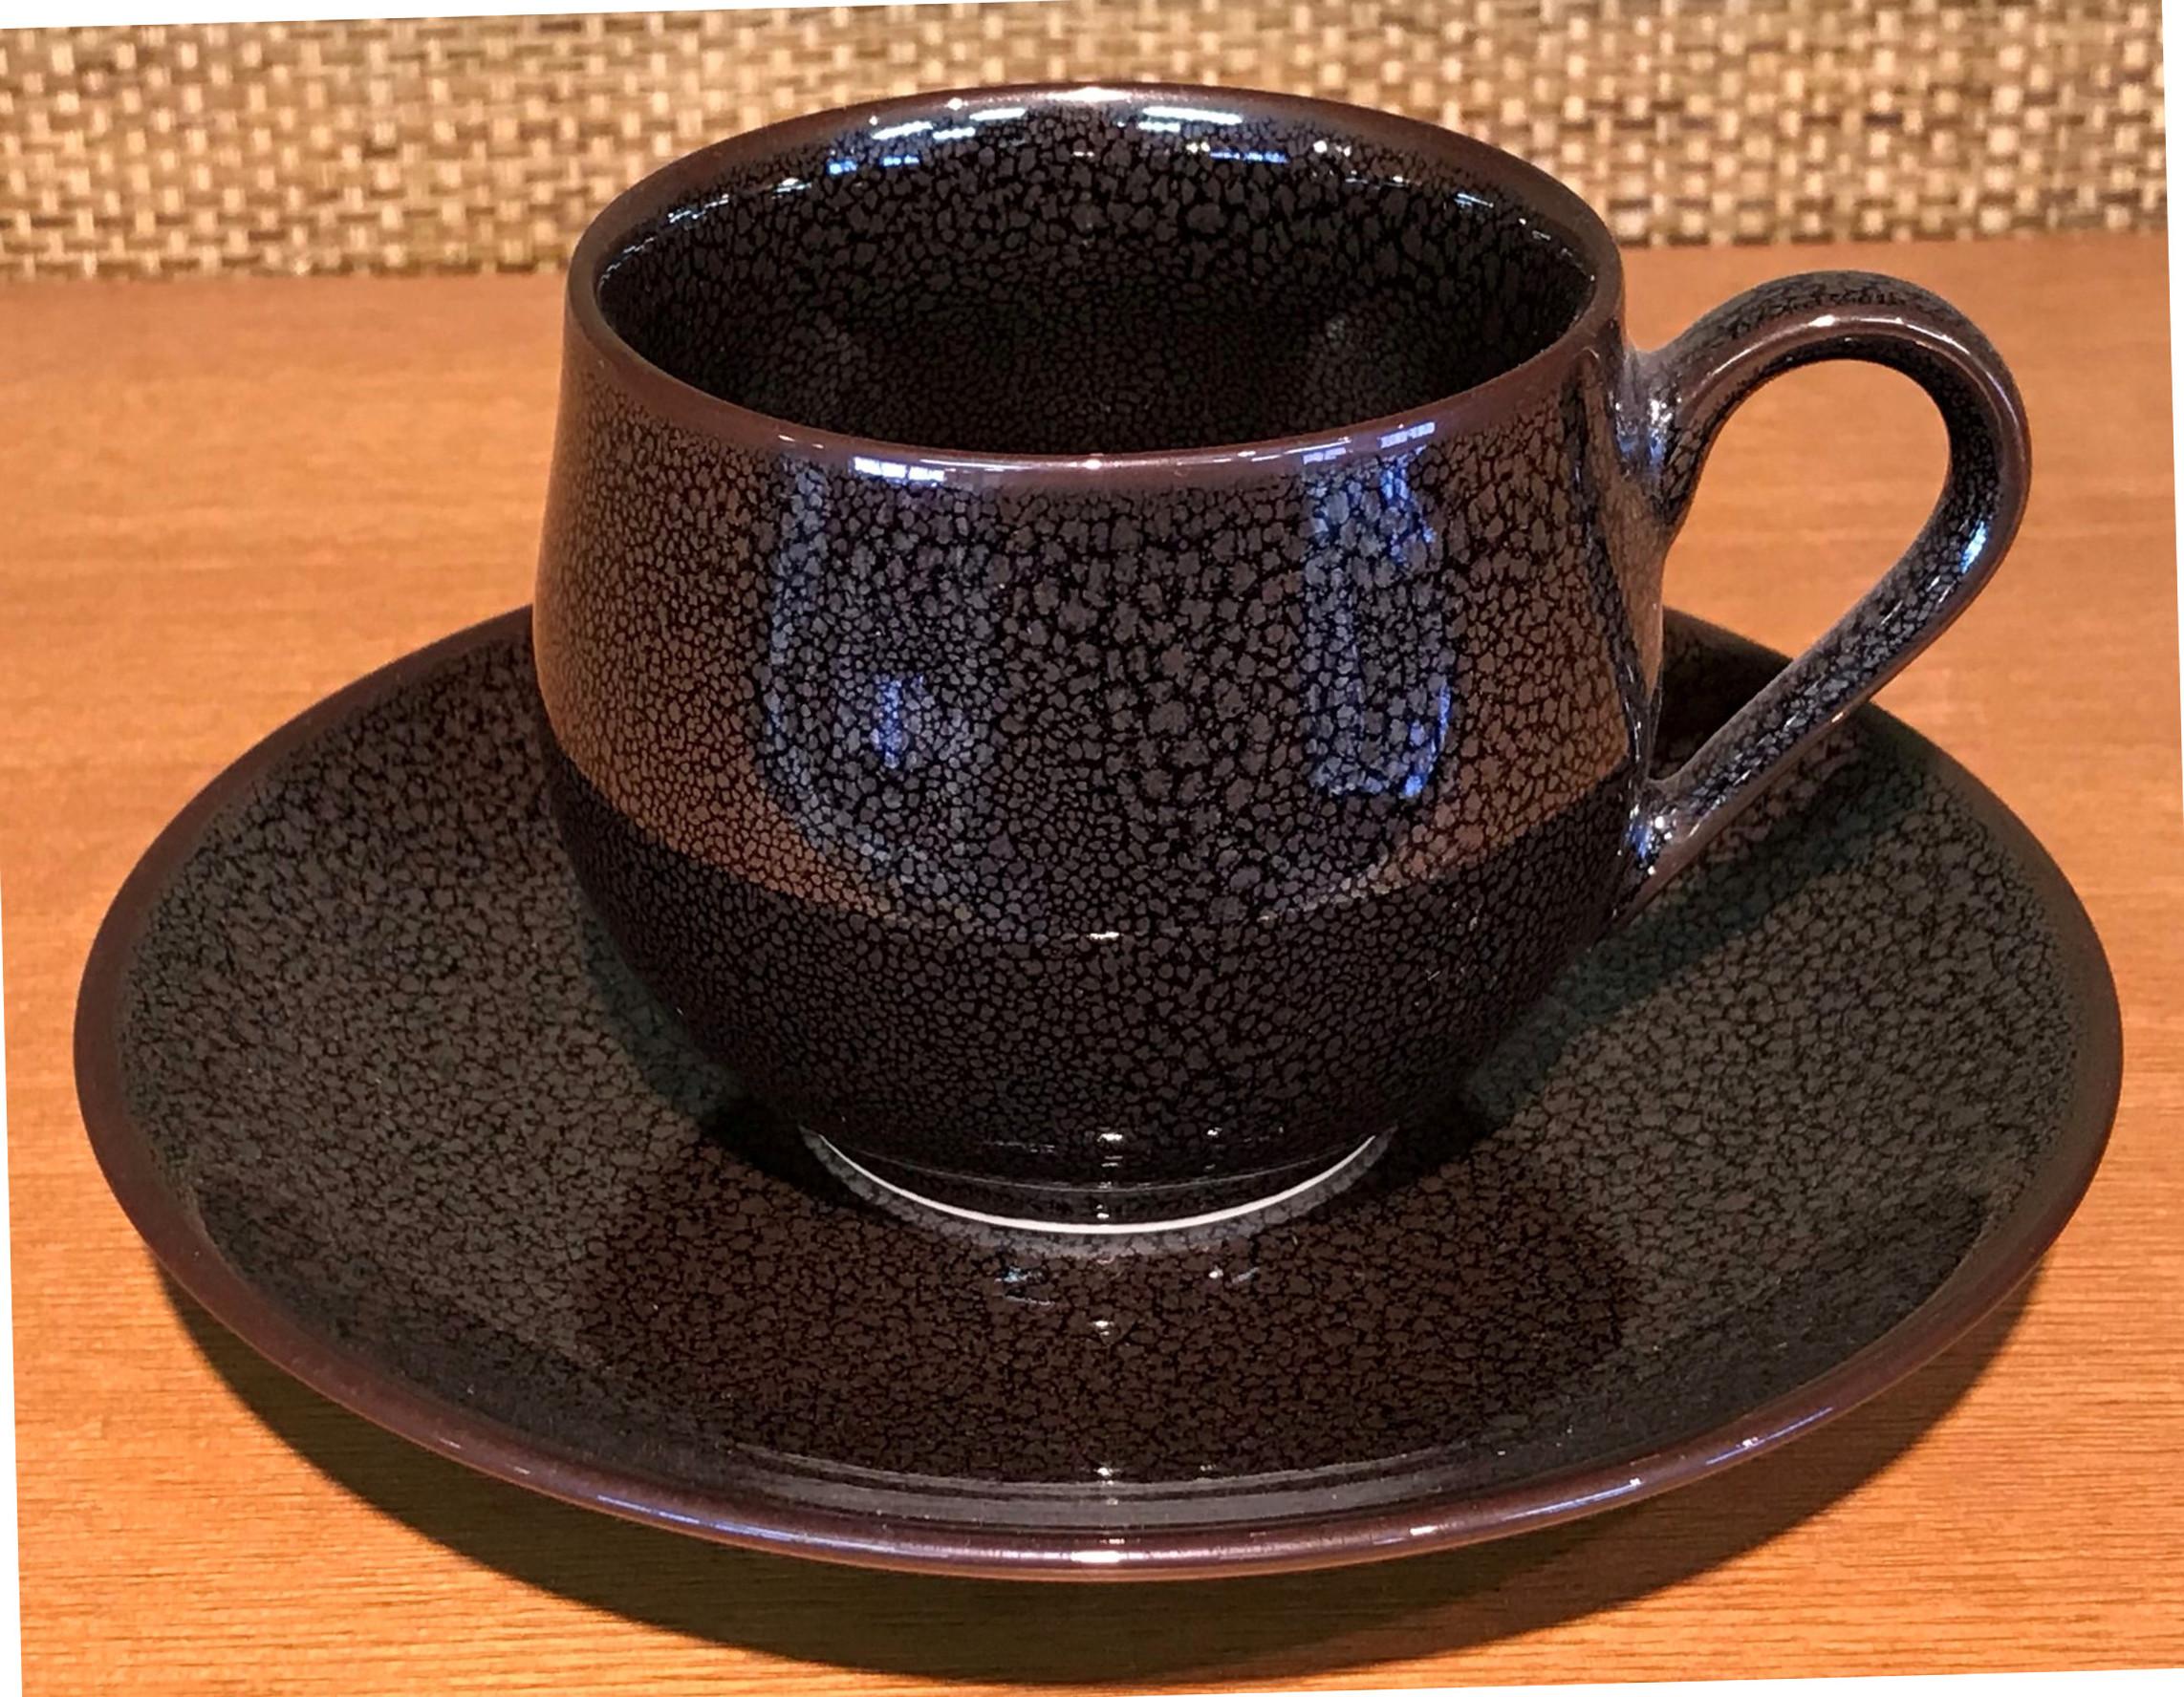 Japanese Blue Hand-Glazed Porcelain Cup and Saucer by Master Artist For Sale 8